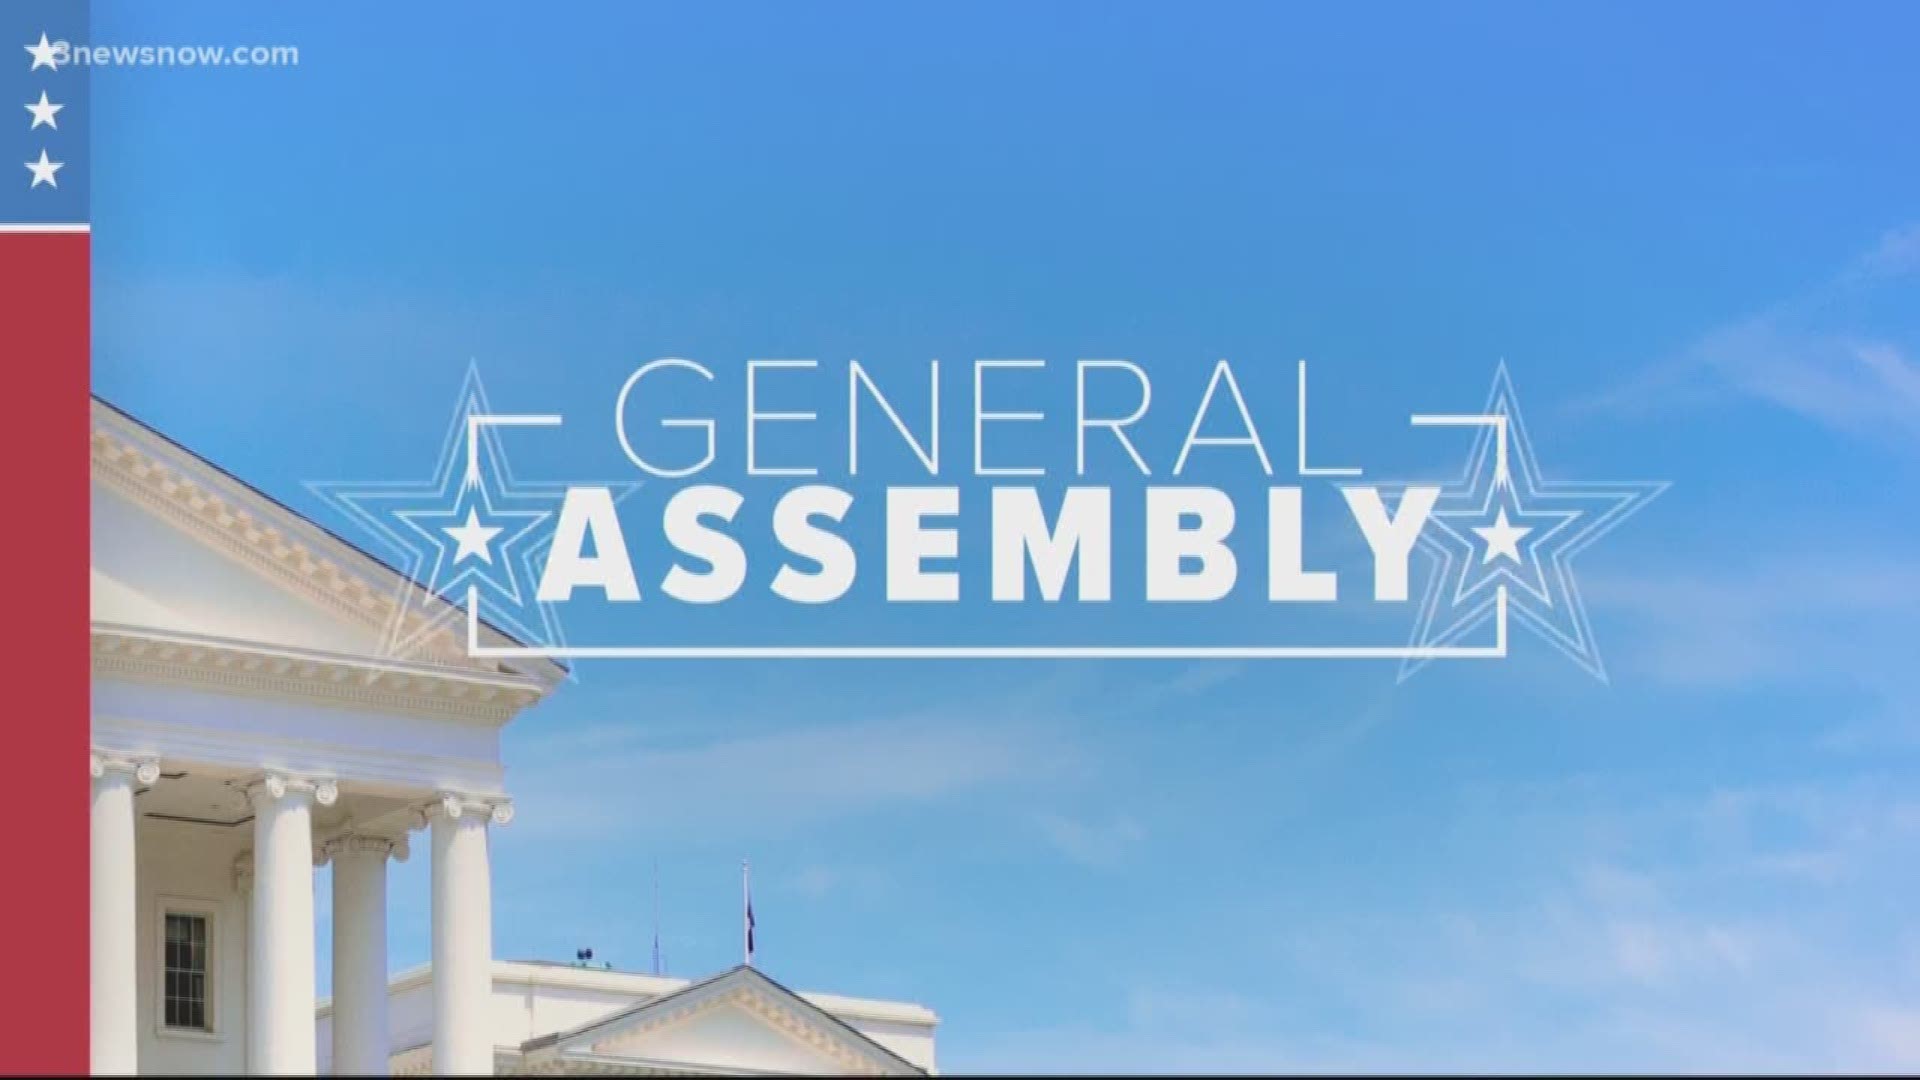 Two hotly debated bills are making progress in the General Assembly: giving cities the ability to remove Confederate monuments & raising the minimum wage in Virginia